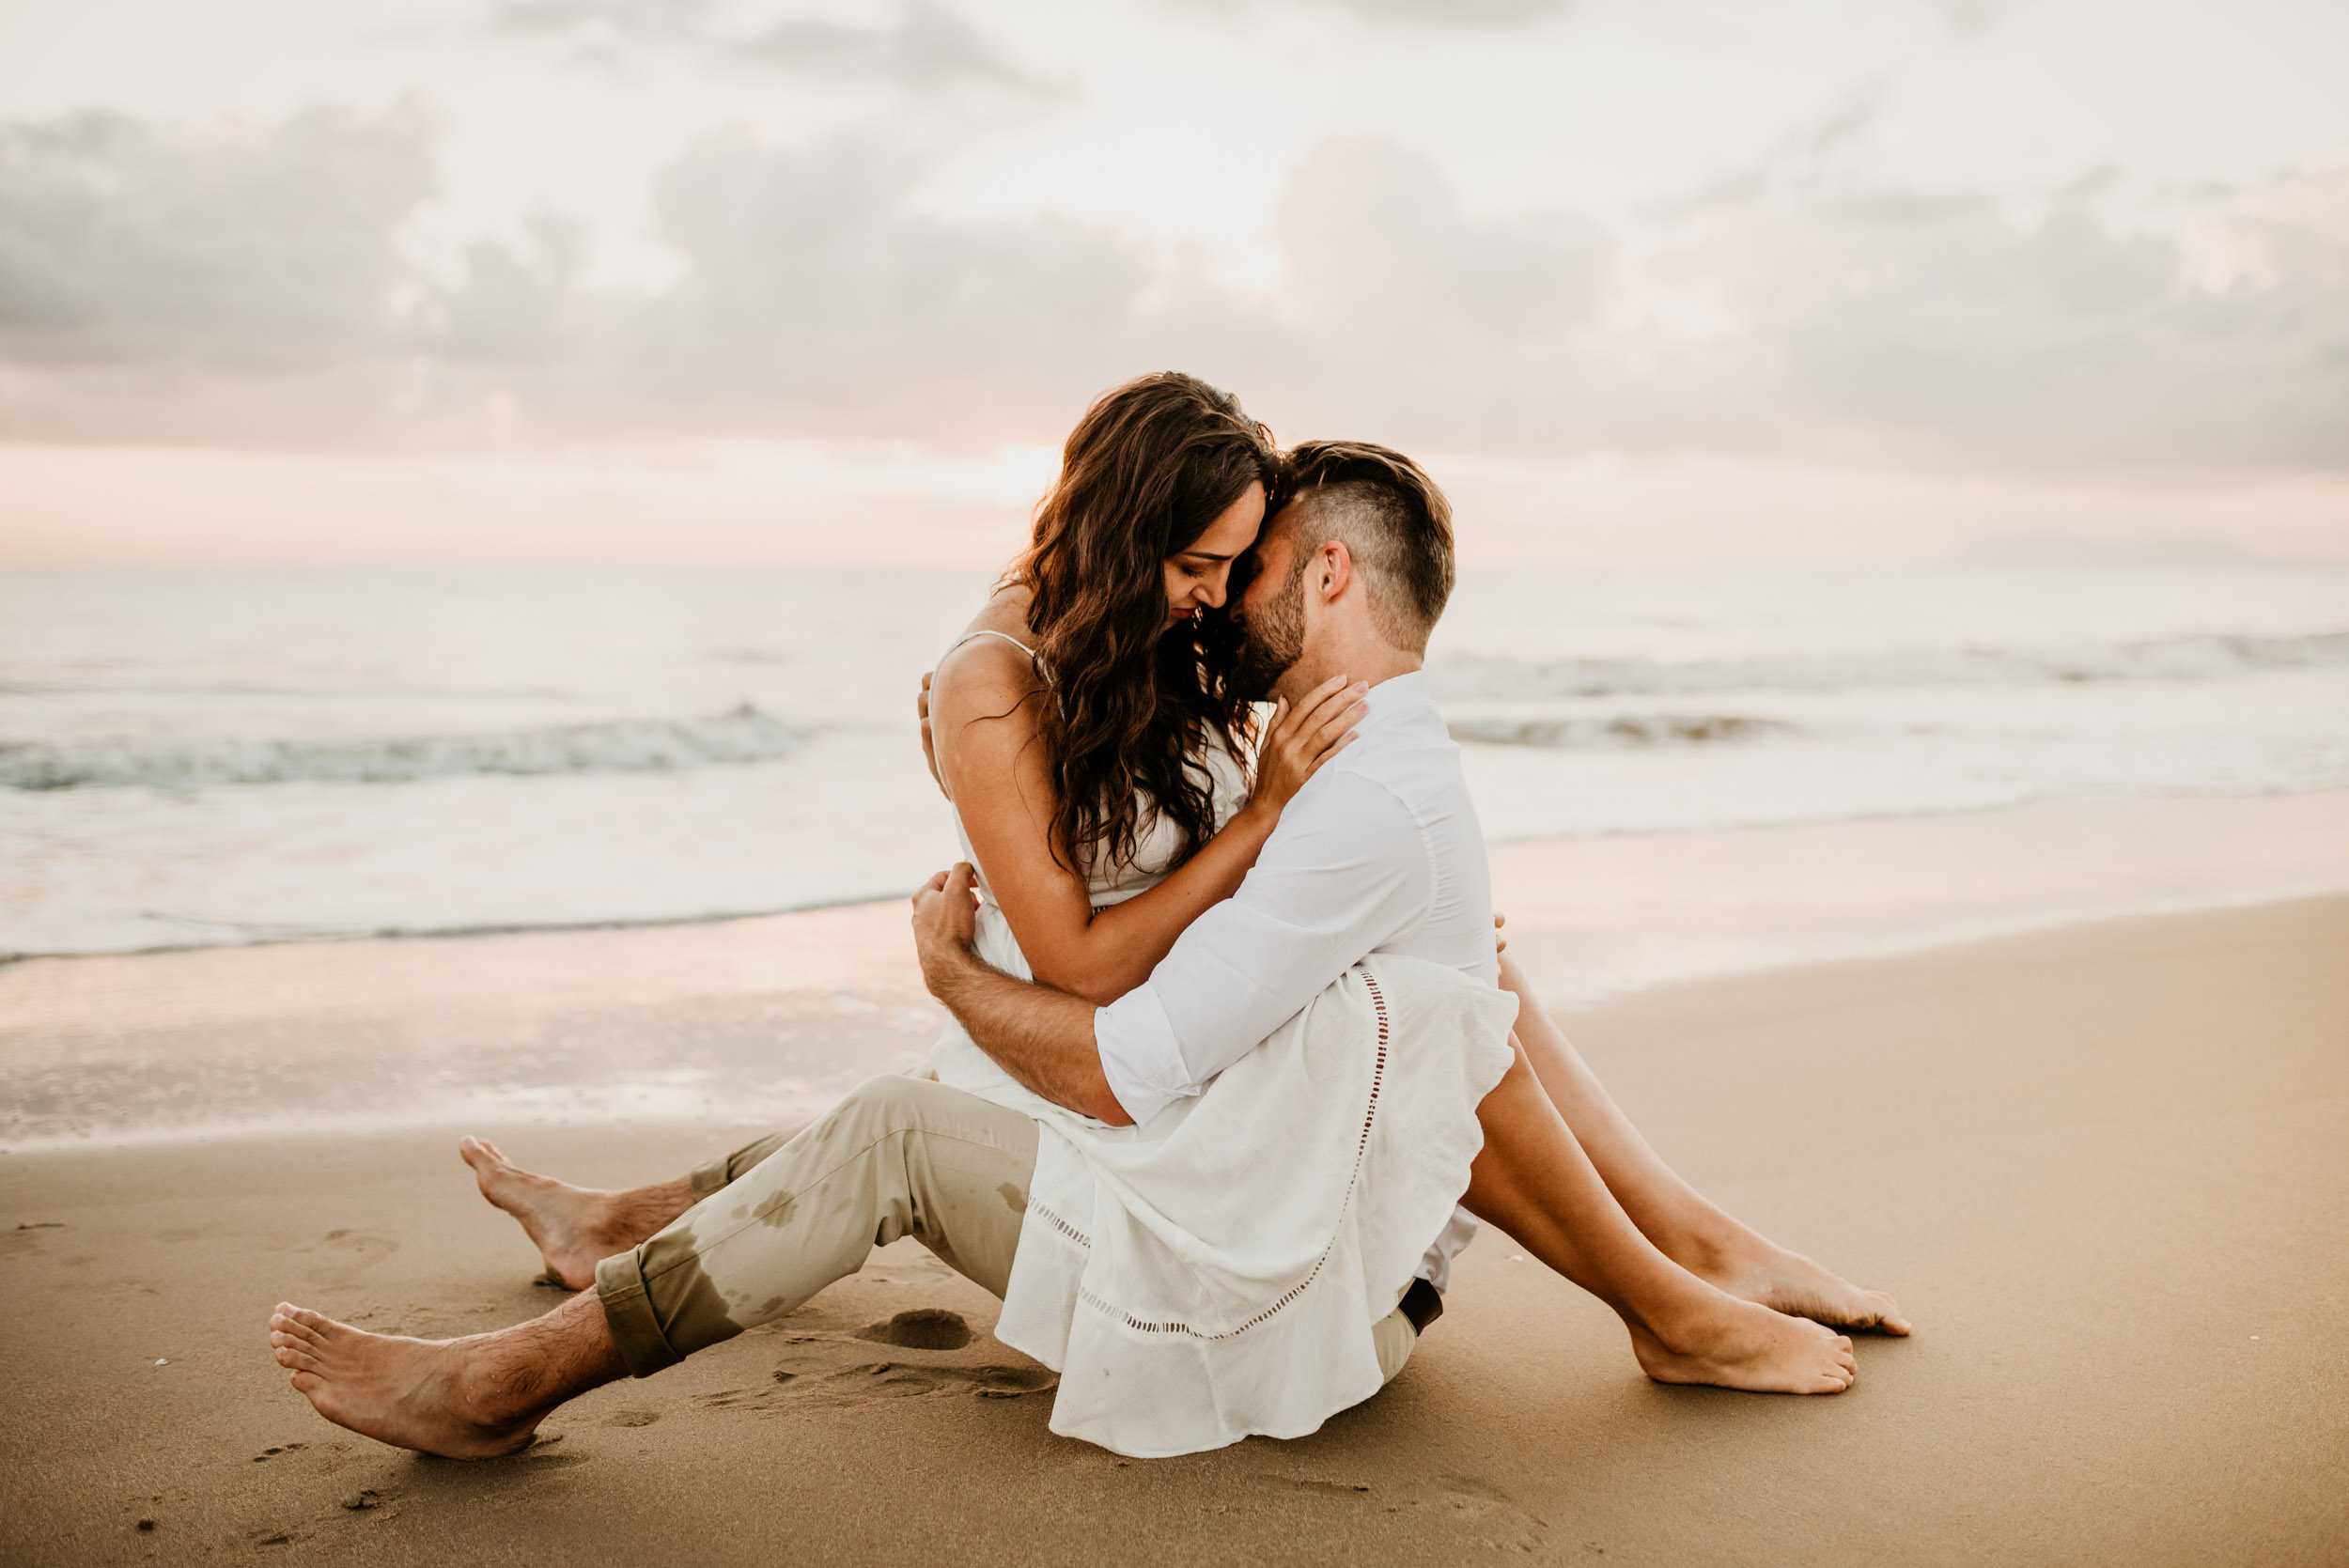 The Raw Photographer - Cairns Wedding Photographer - Engaged Engagement - Beach location - Candid Photography Queensland-12.jpg